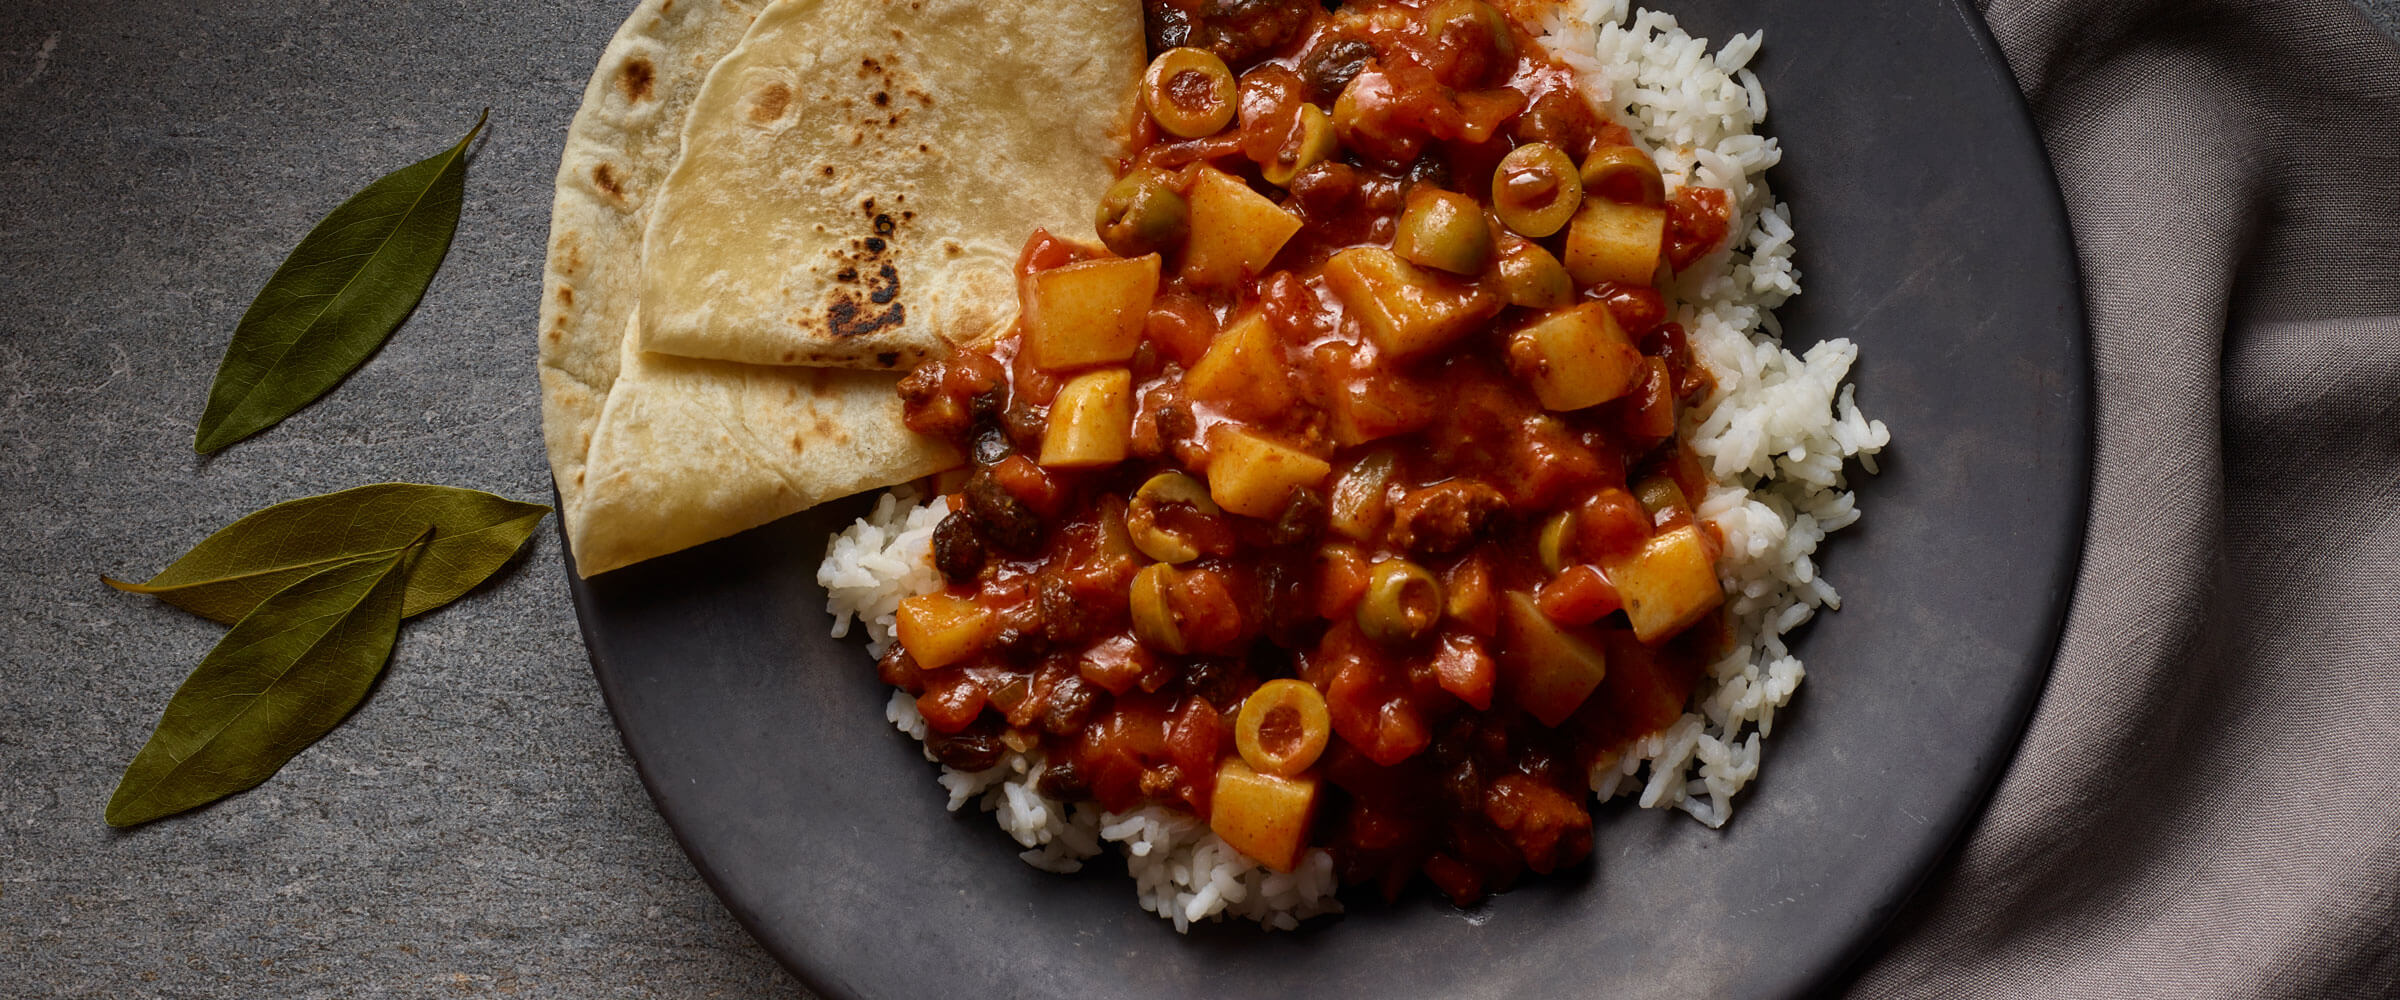 Chili Picadillo over rice with folded tortillas on gray plate